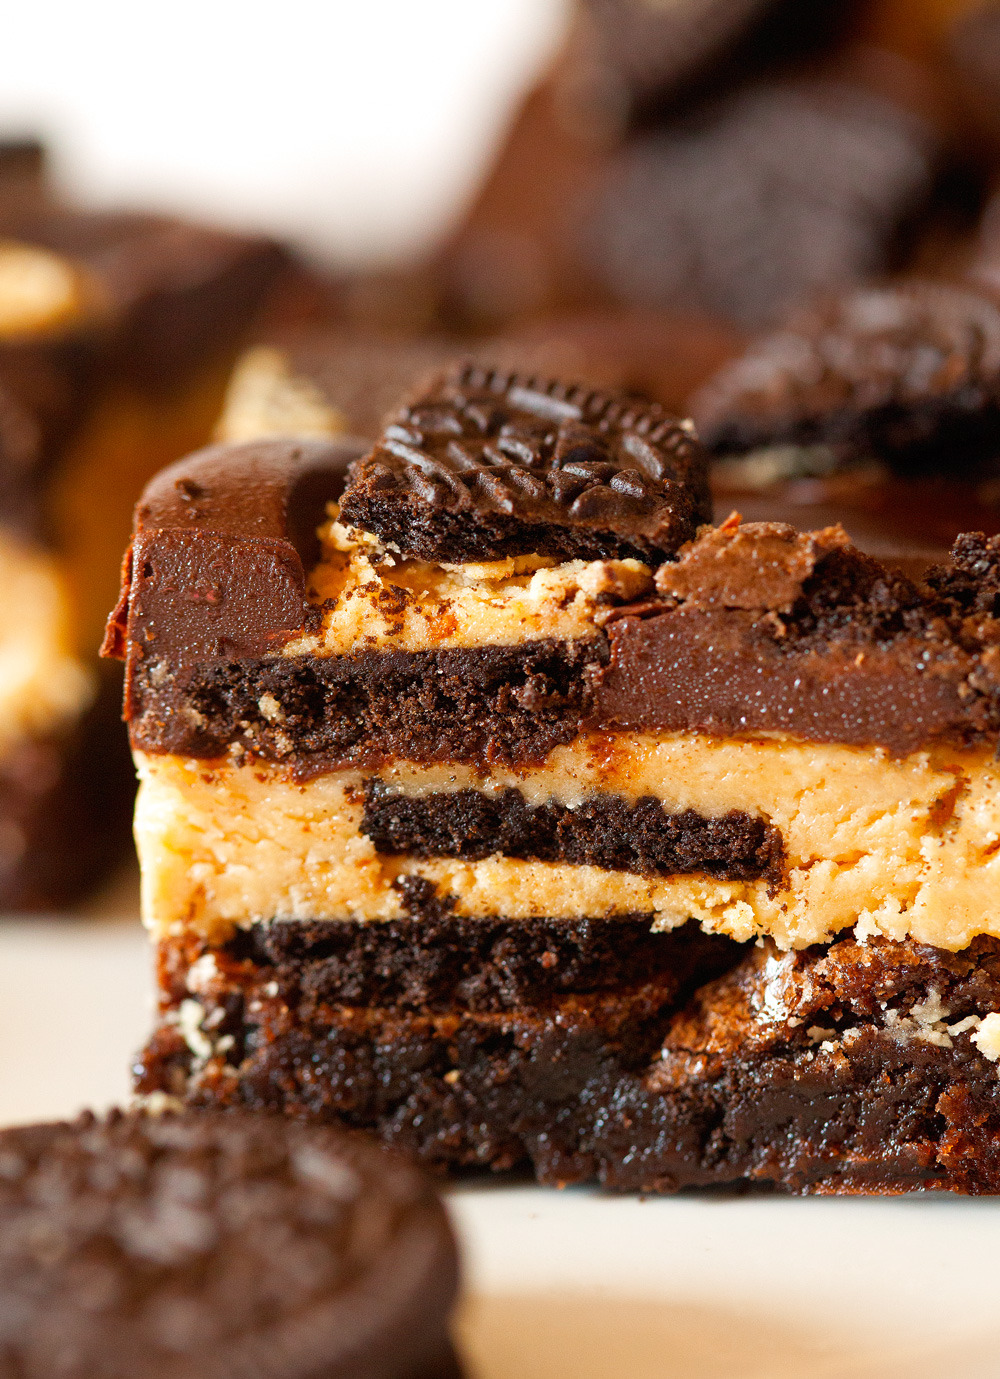 Chocolate, Oreo and Peanut Butter Brownies